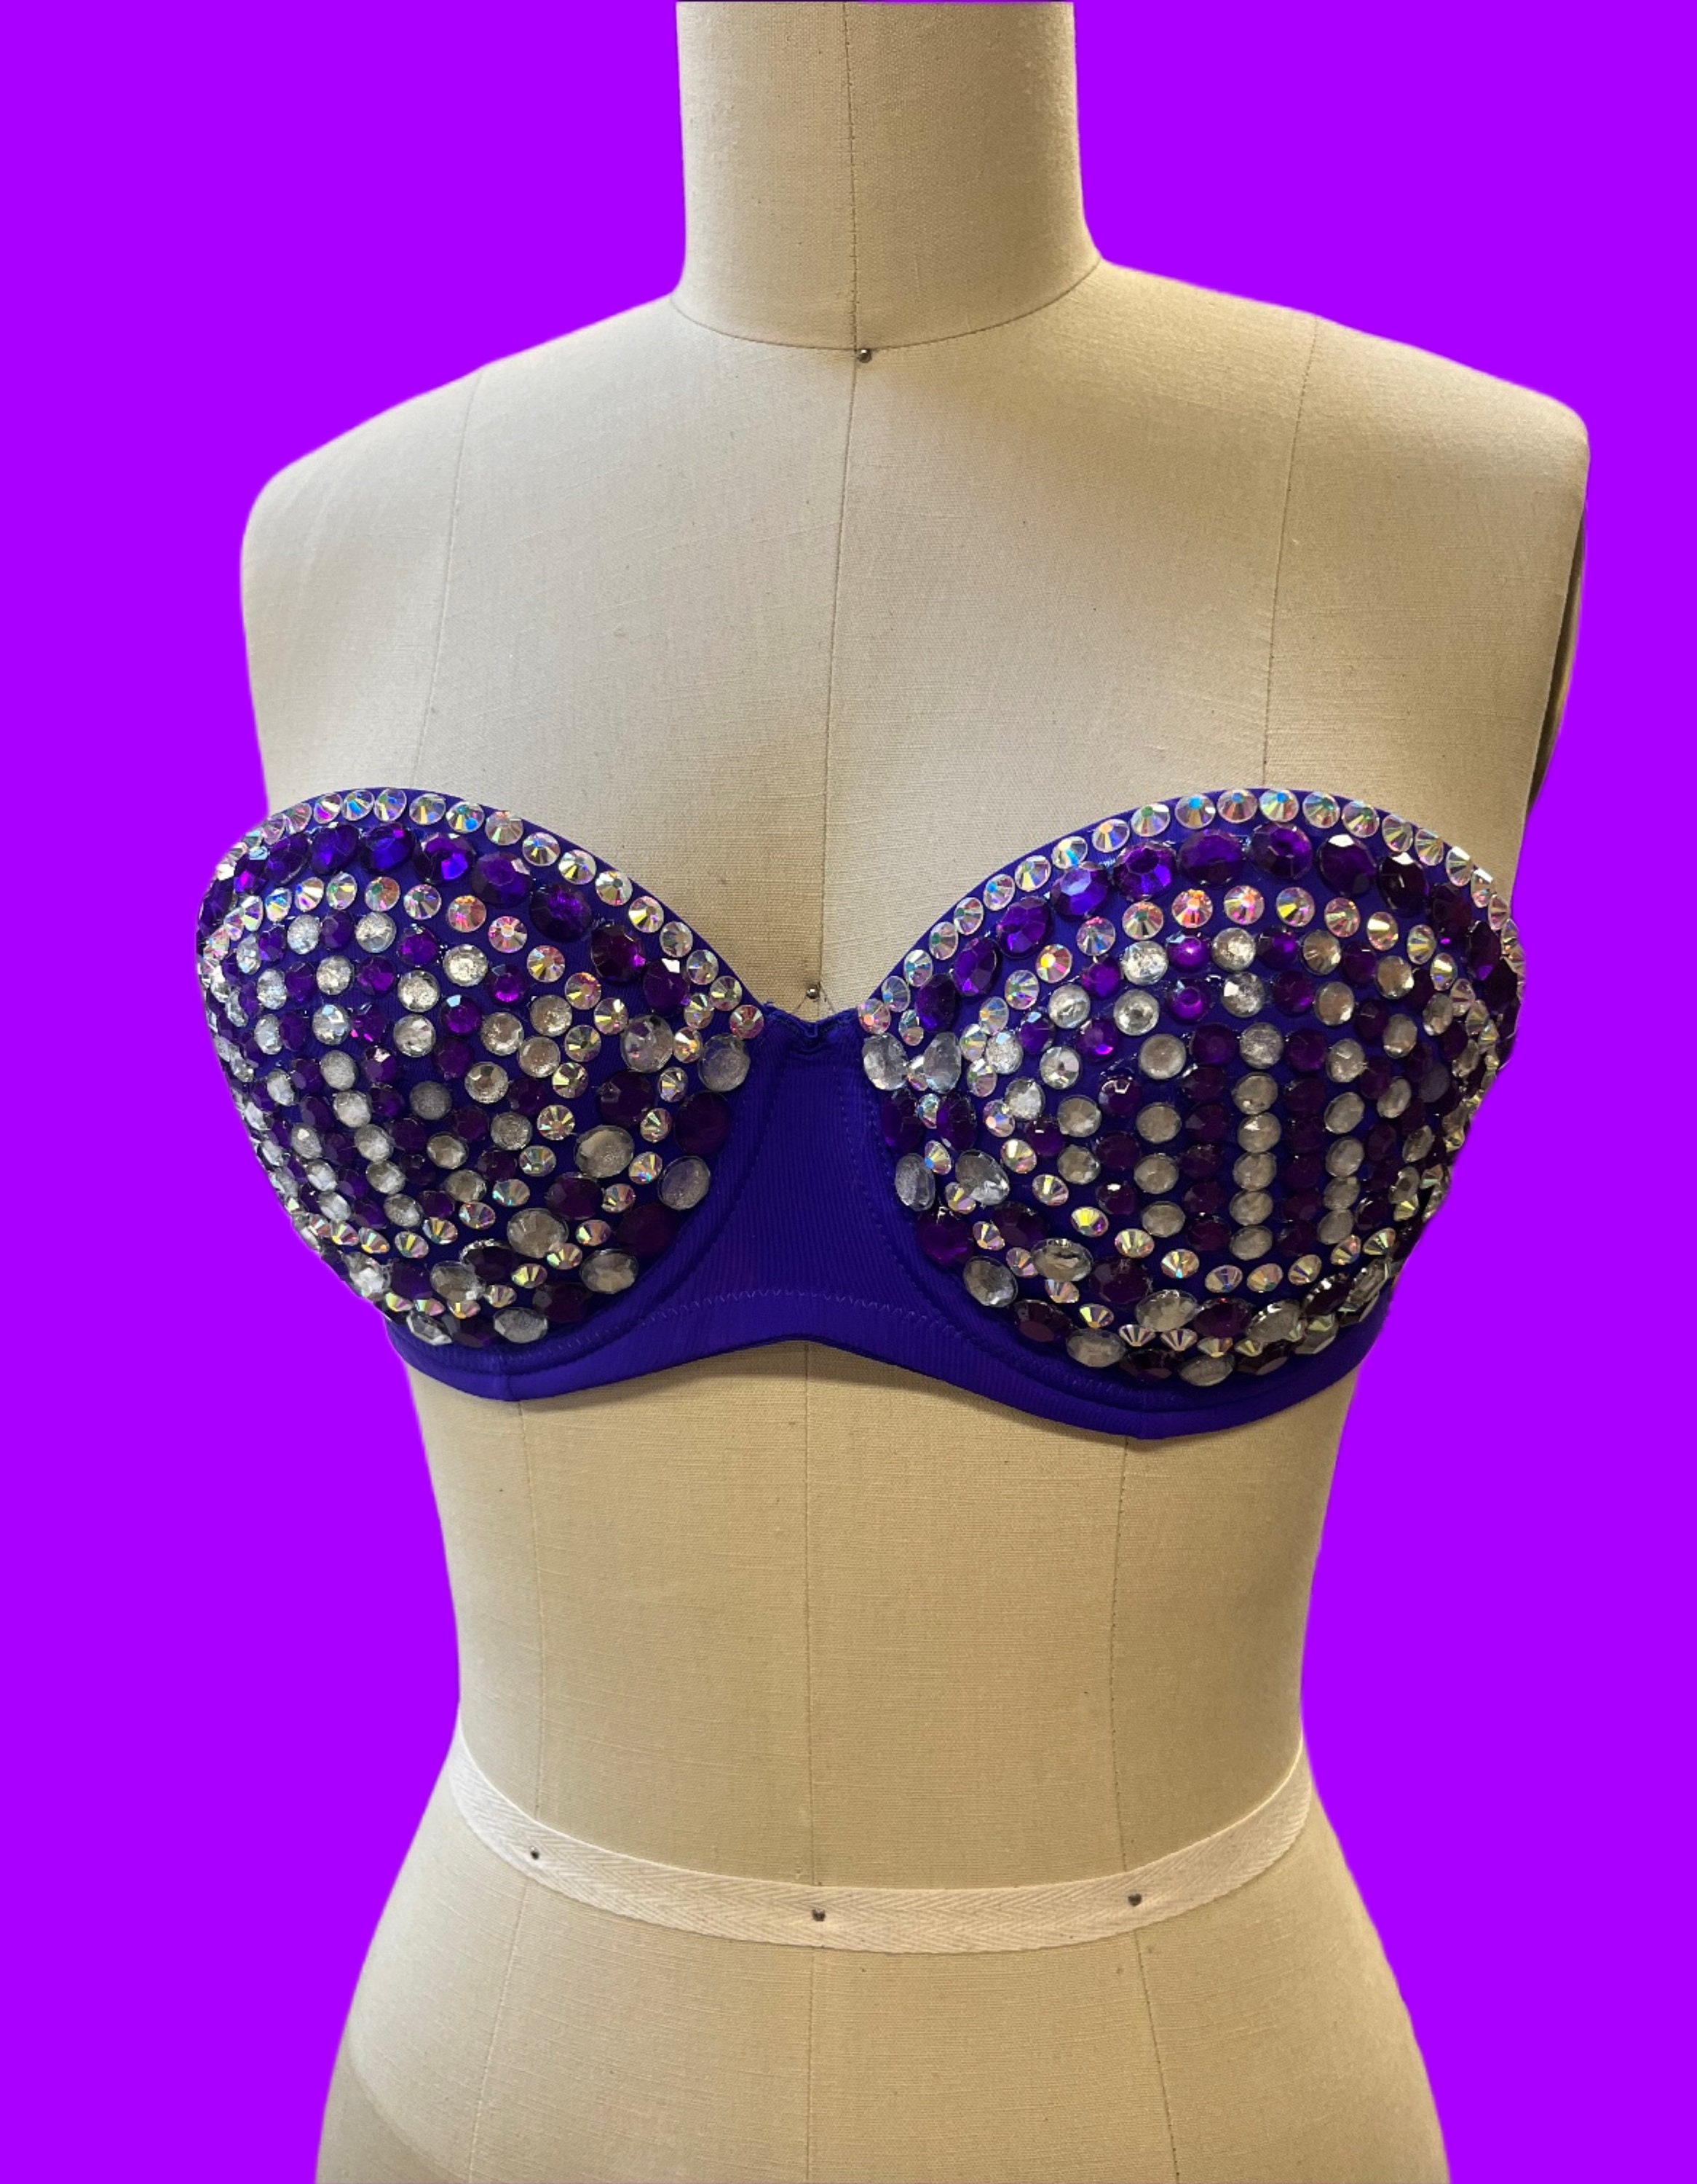 Their bedazzled bras.